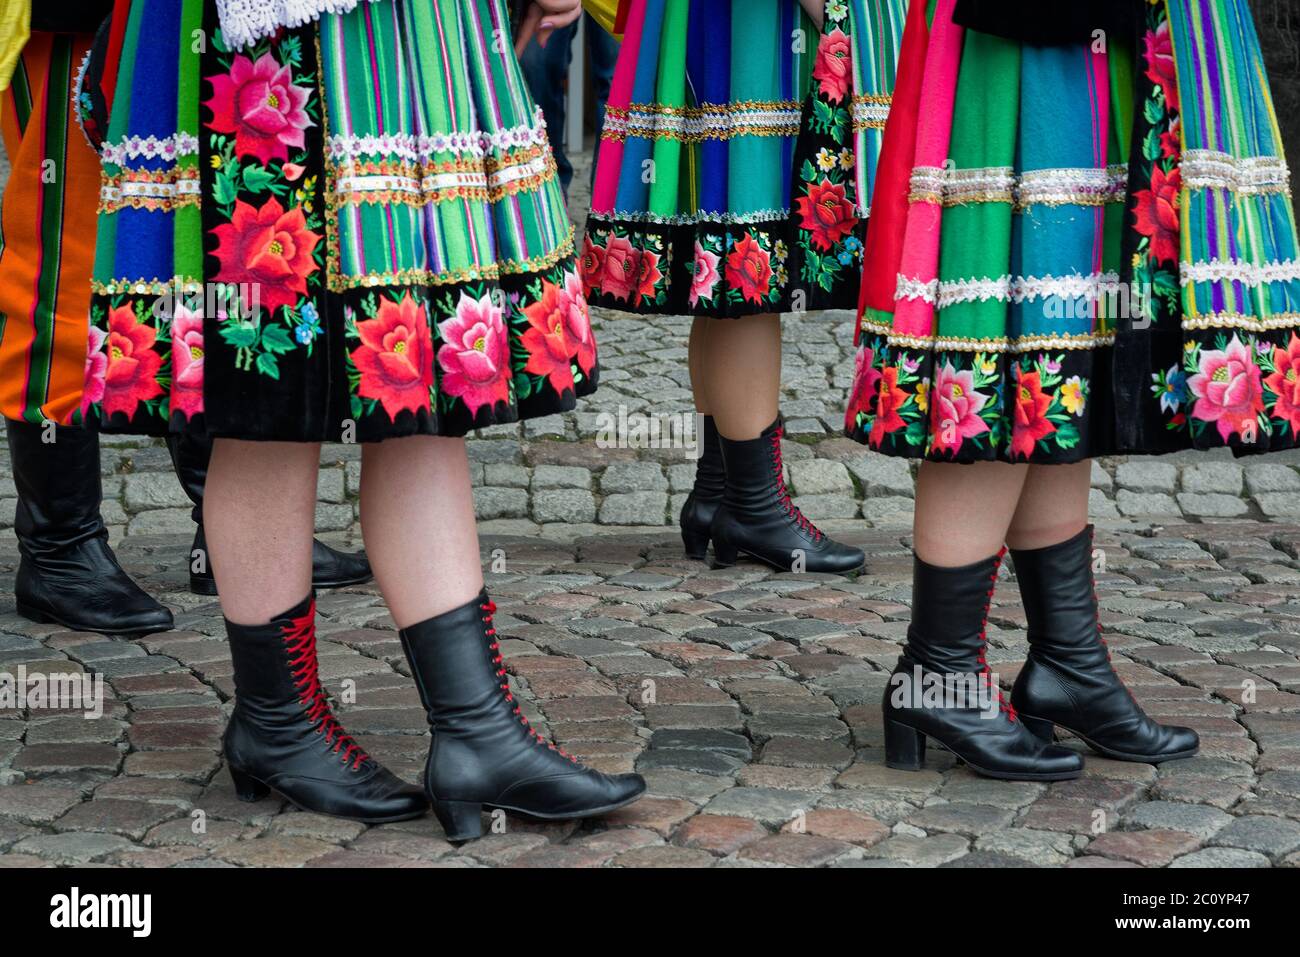 Women And Young Girls Wearing Regional Folk Costumes From Lowicz Region In Poland During Annual